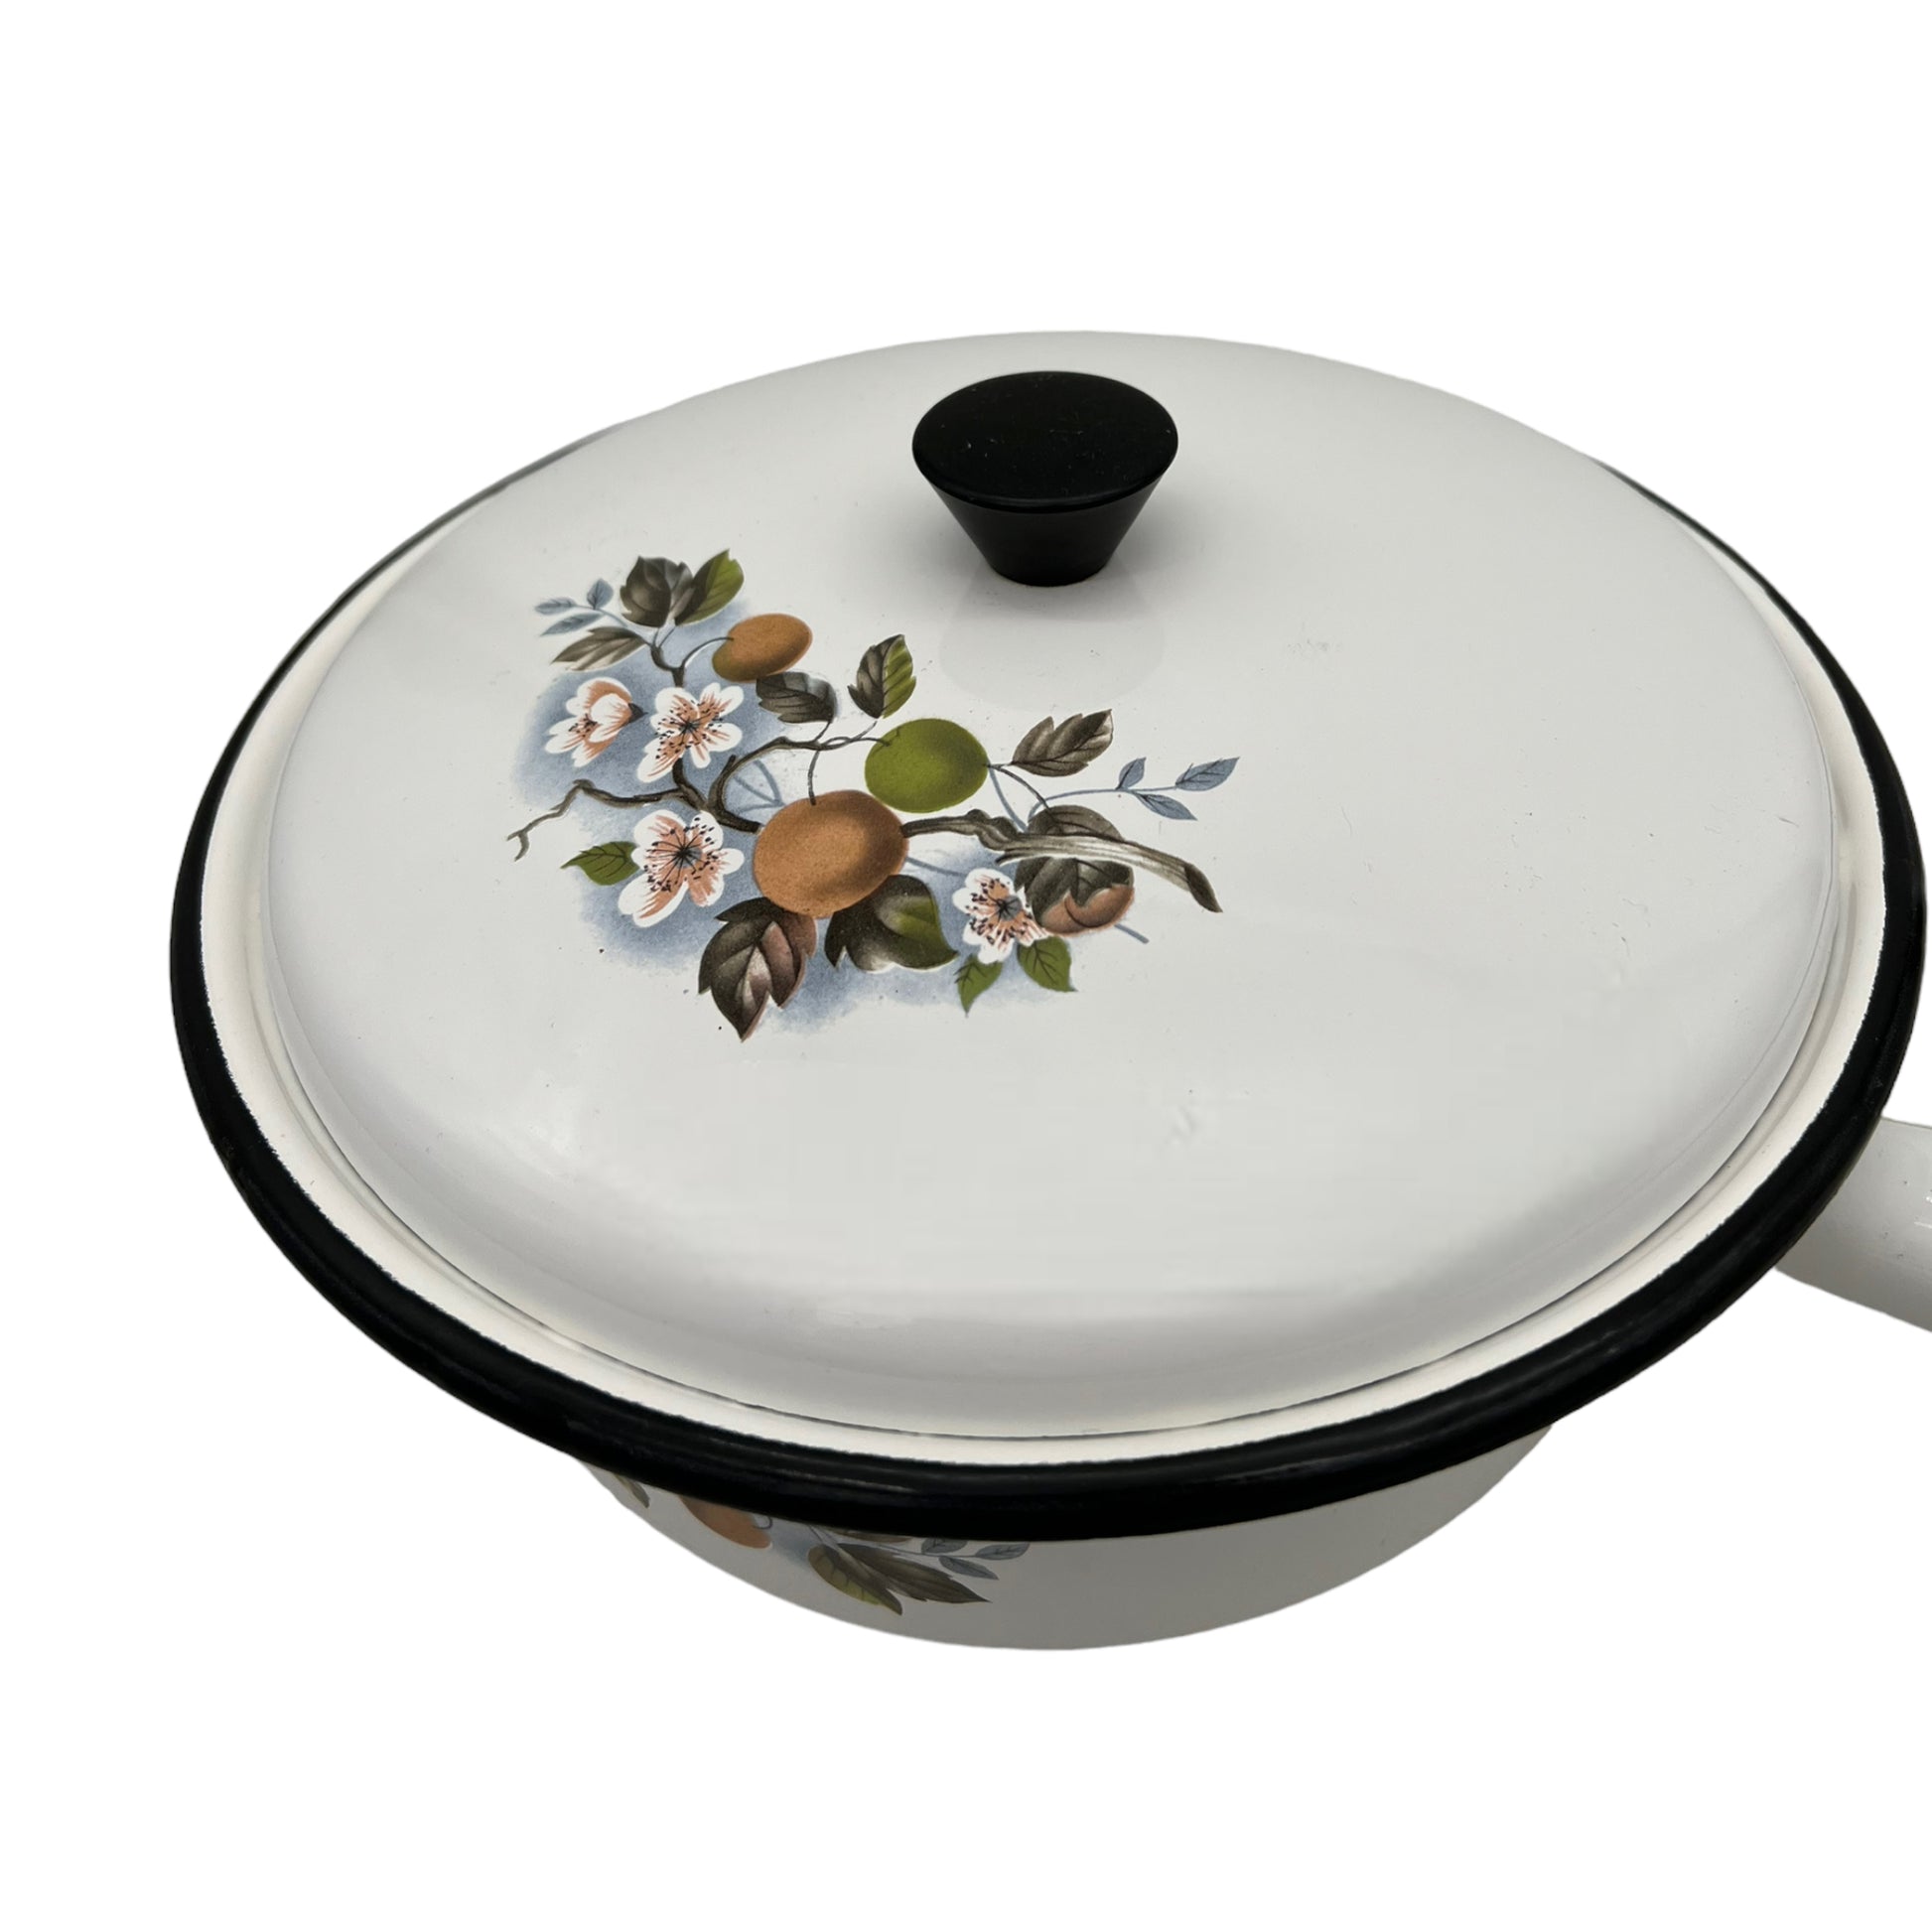 saucepan lid of 3 piece vintage enamel pan set sold by All Things French Store